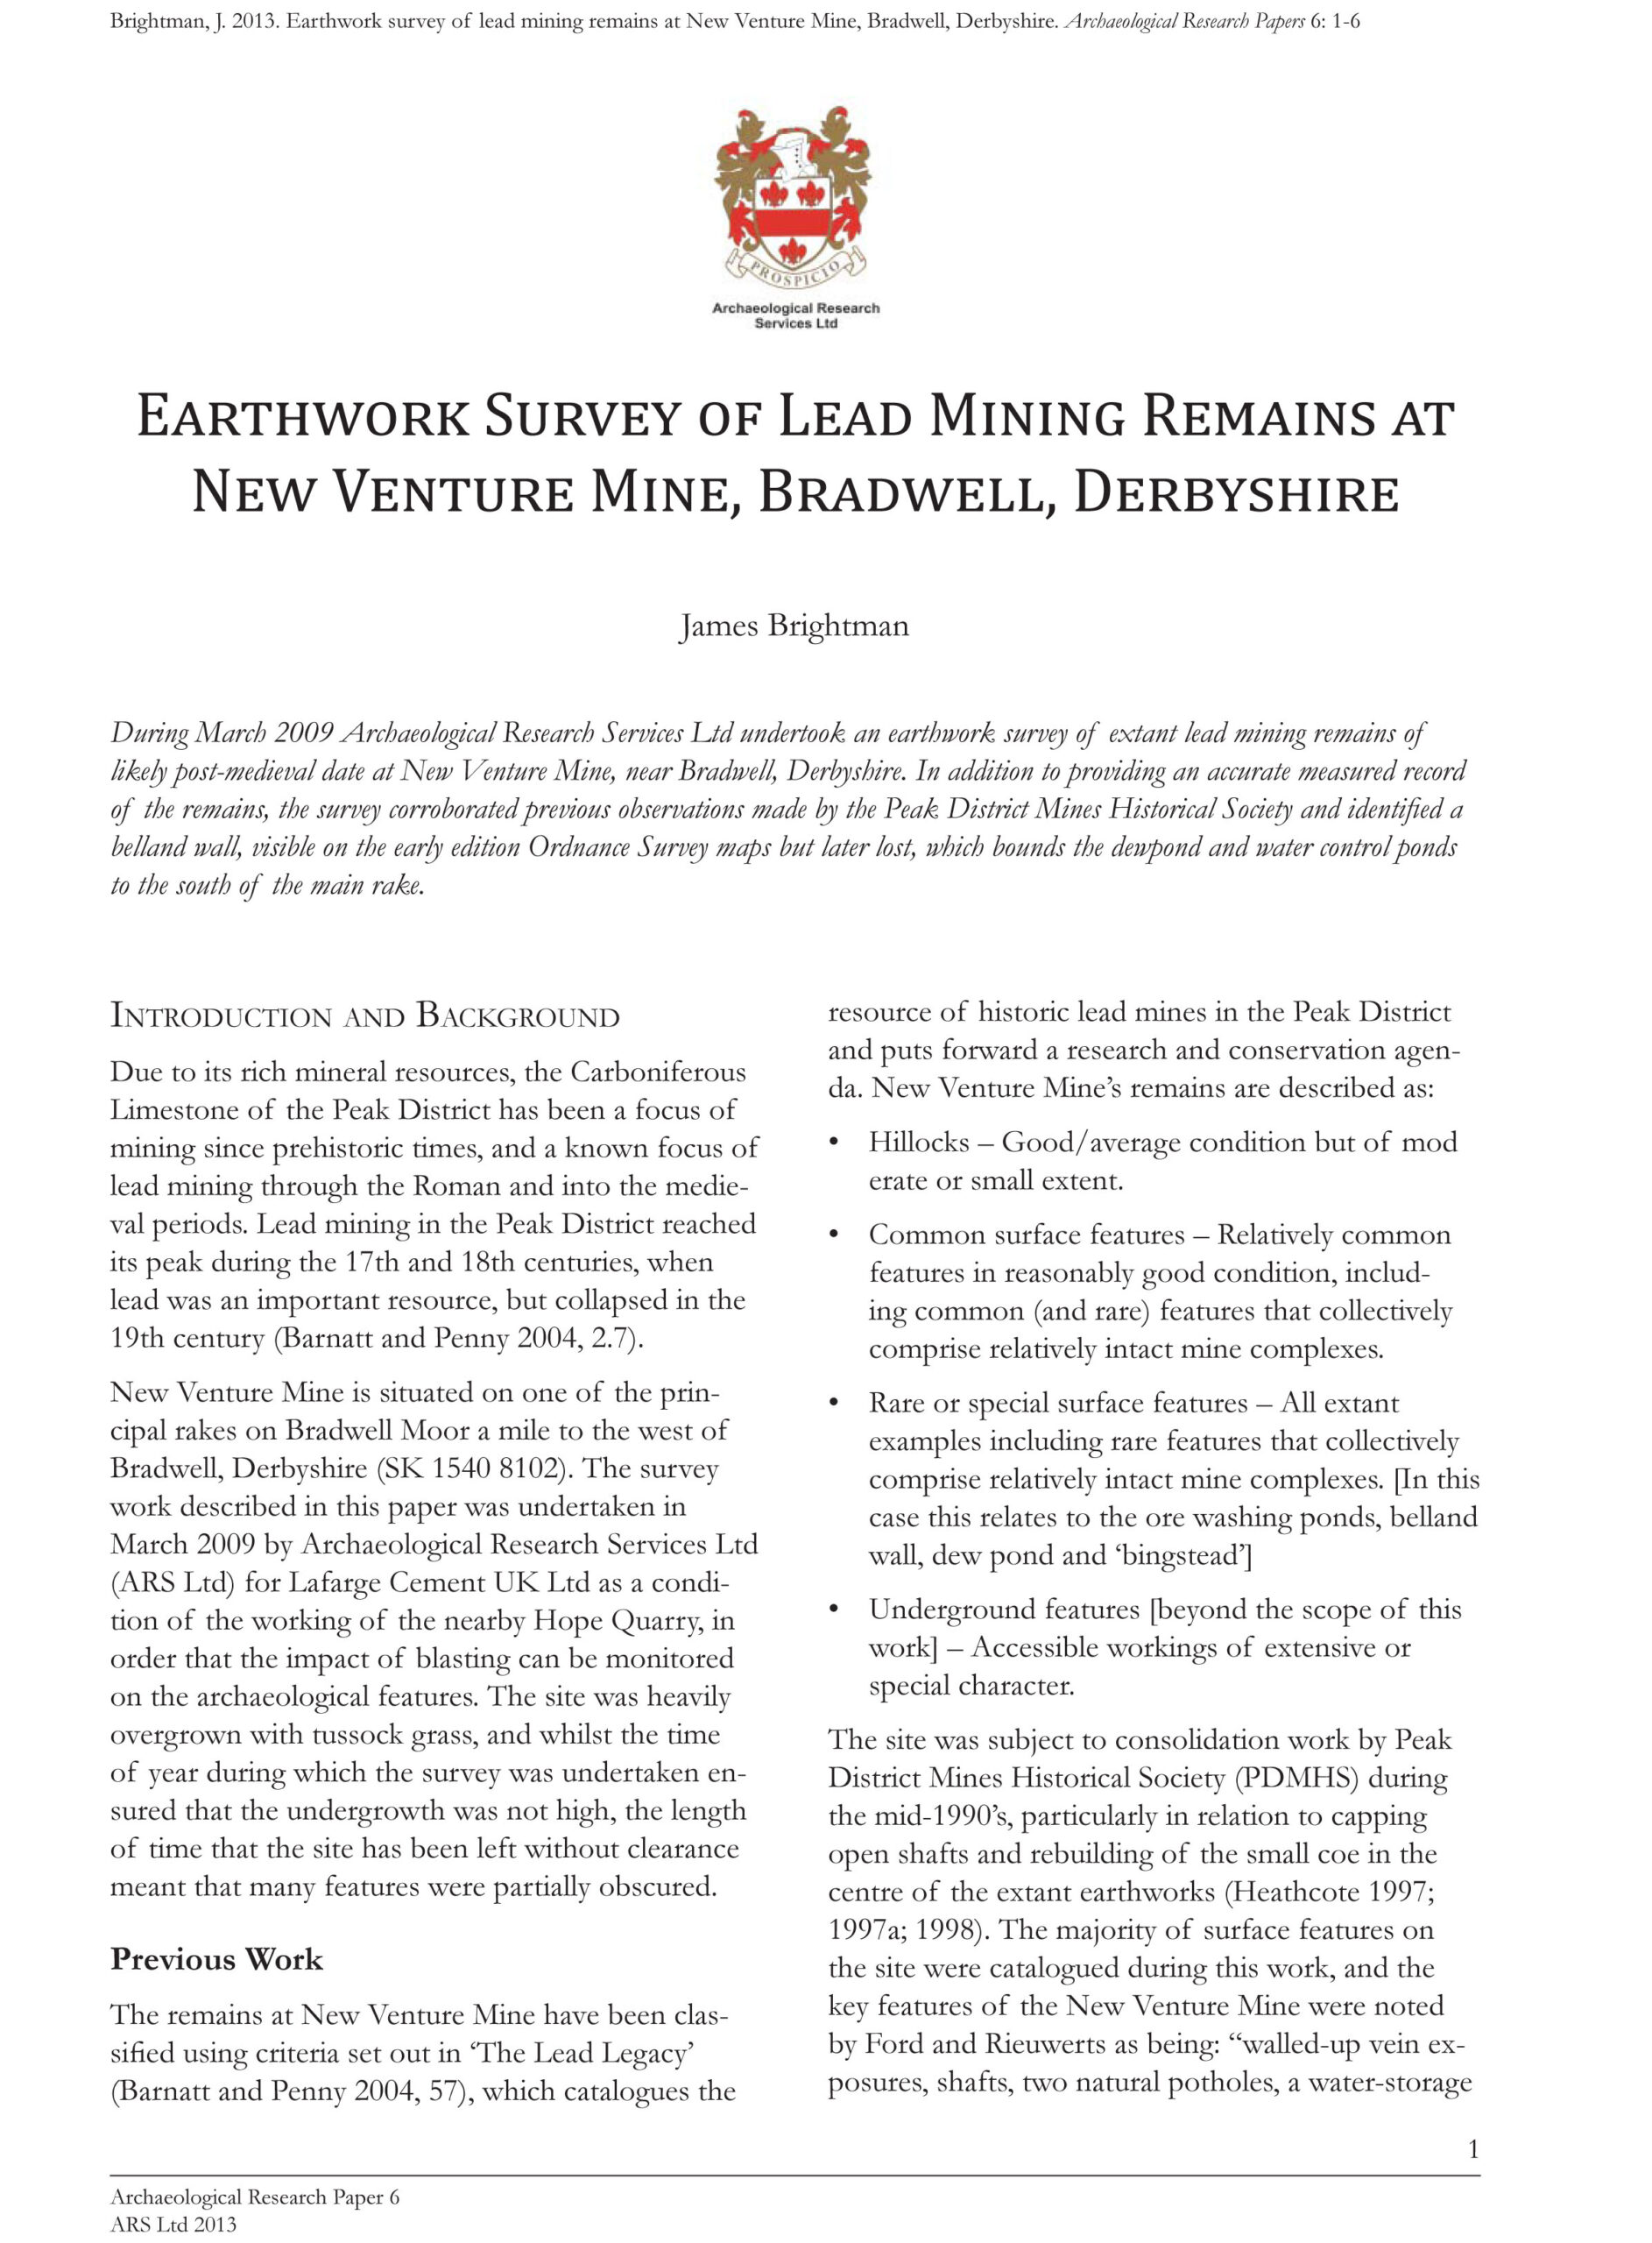 Earthwork Survey of Lead Mining Remains at New Venture Mine, Bradwell